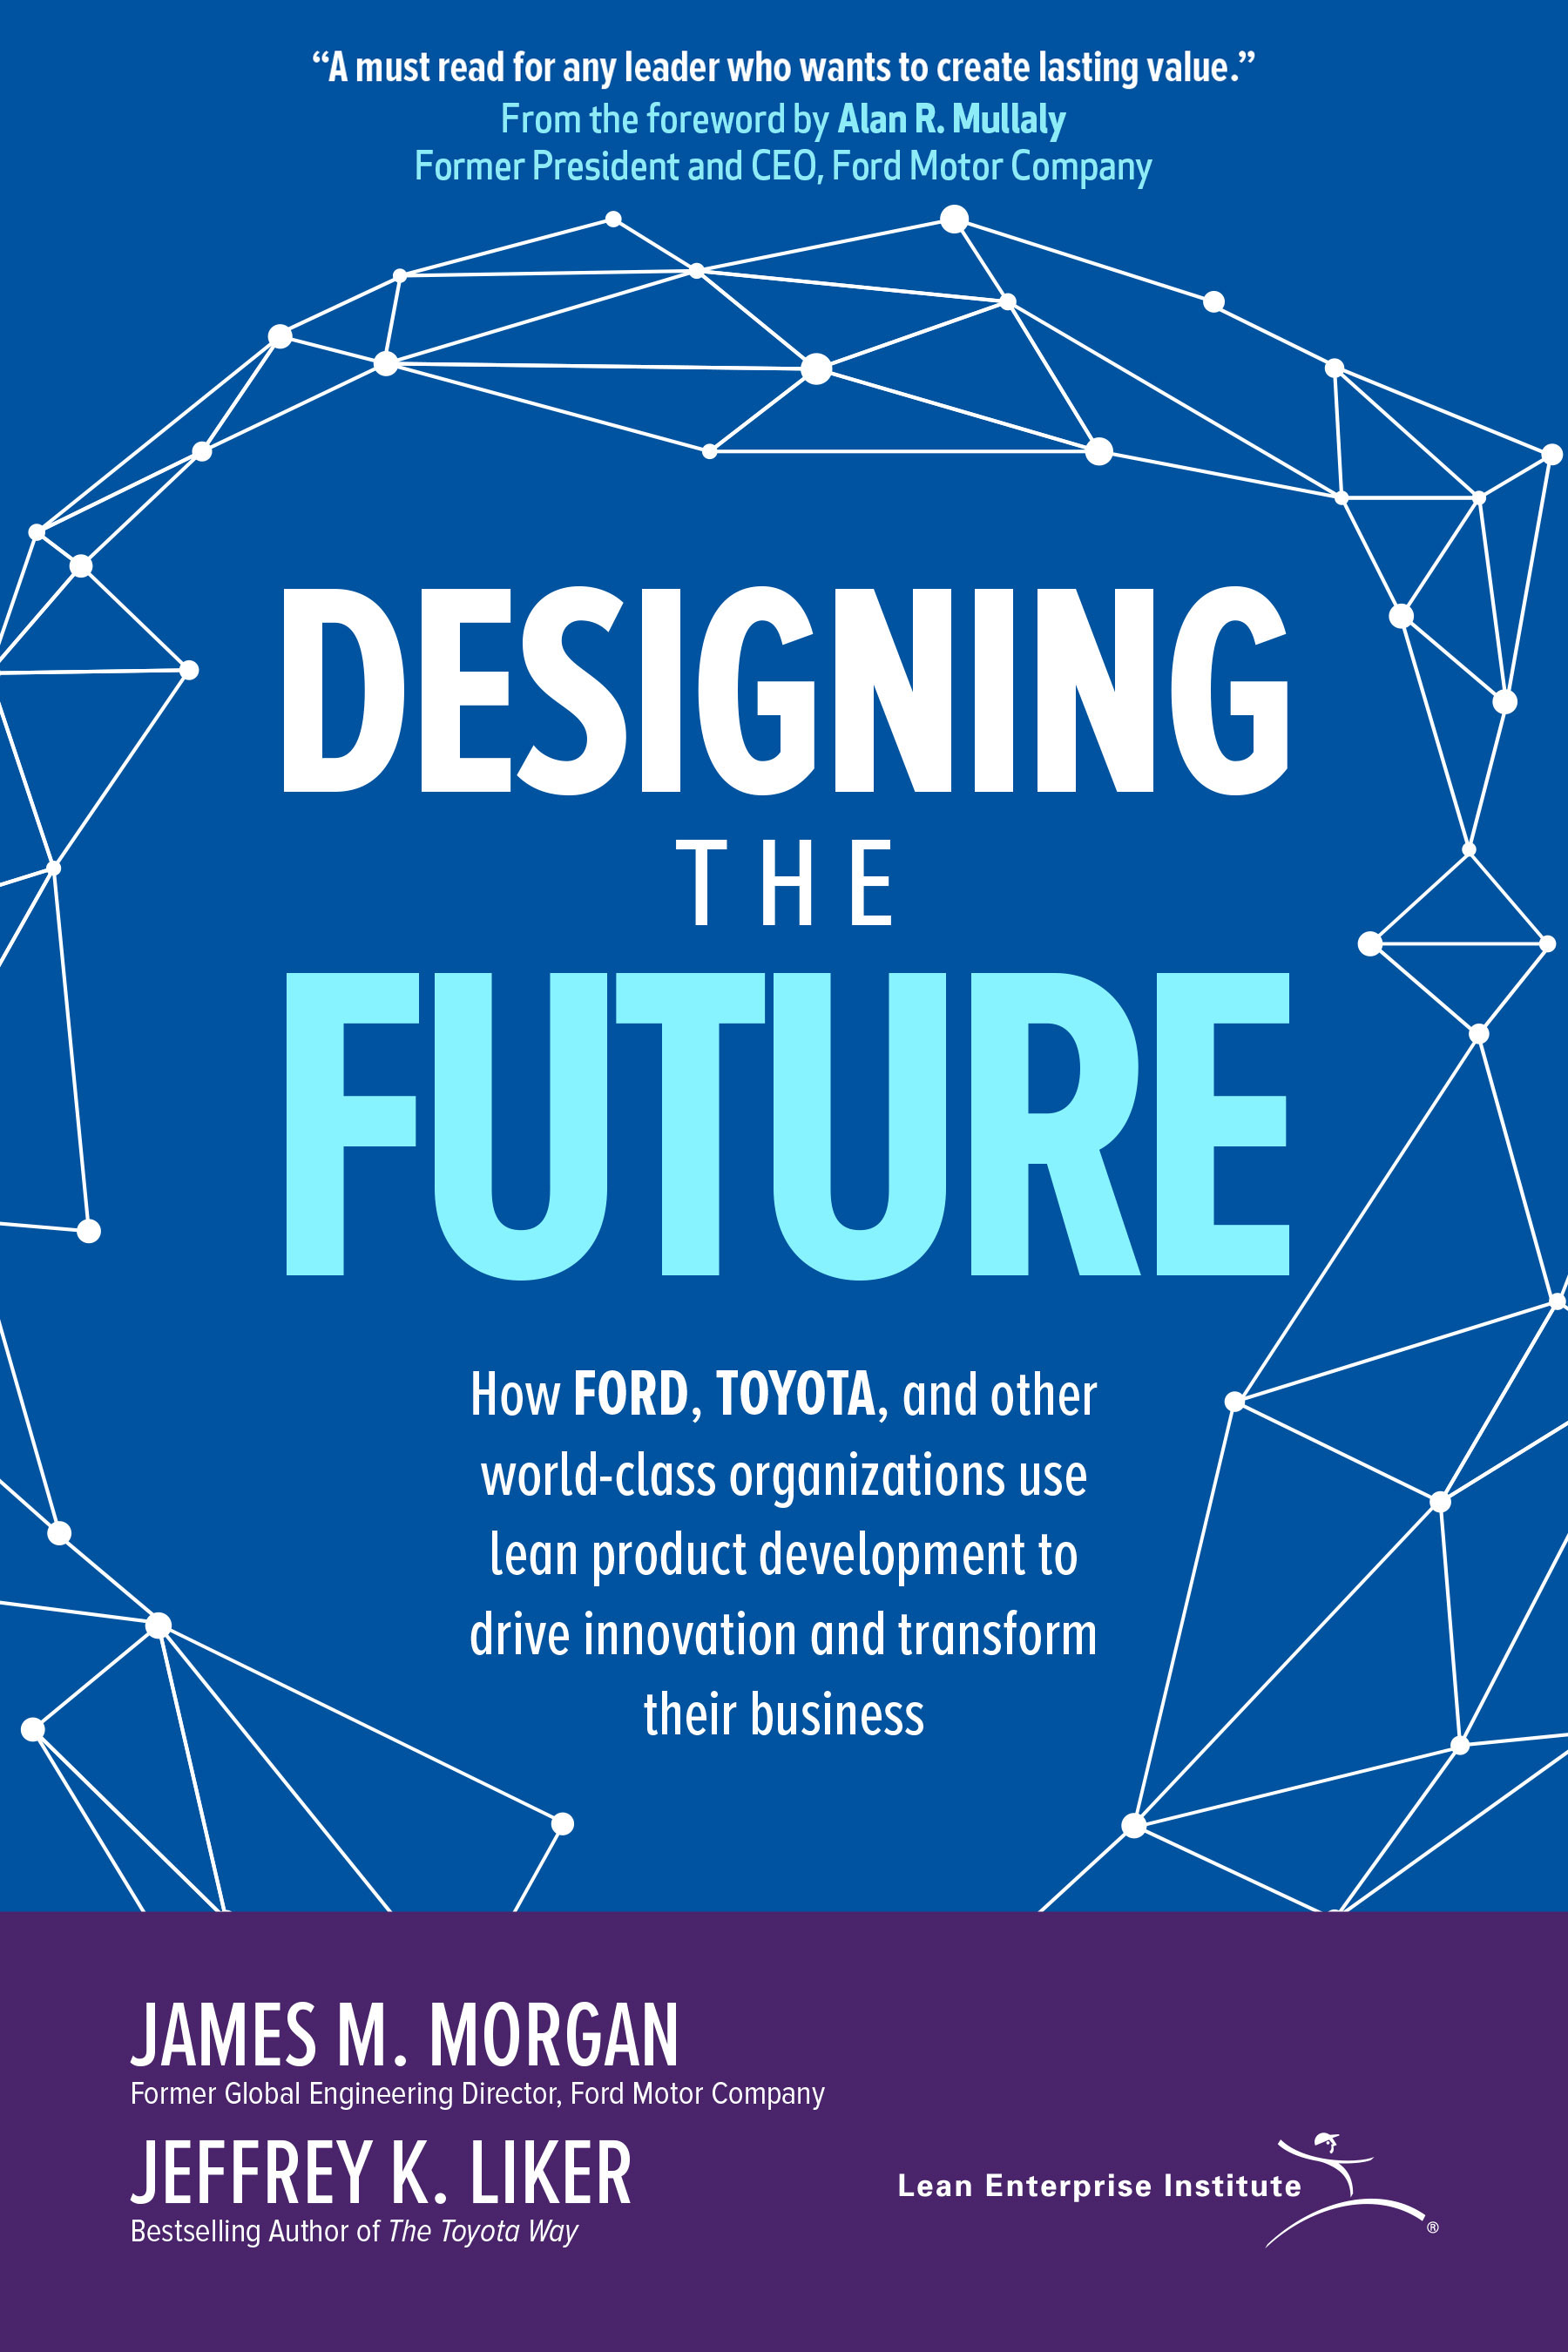 Jim Morgan, COO of electric vehicle startup Rivian, is co-author with Jeff Liker of the new book Designing the Future.